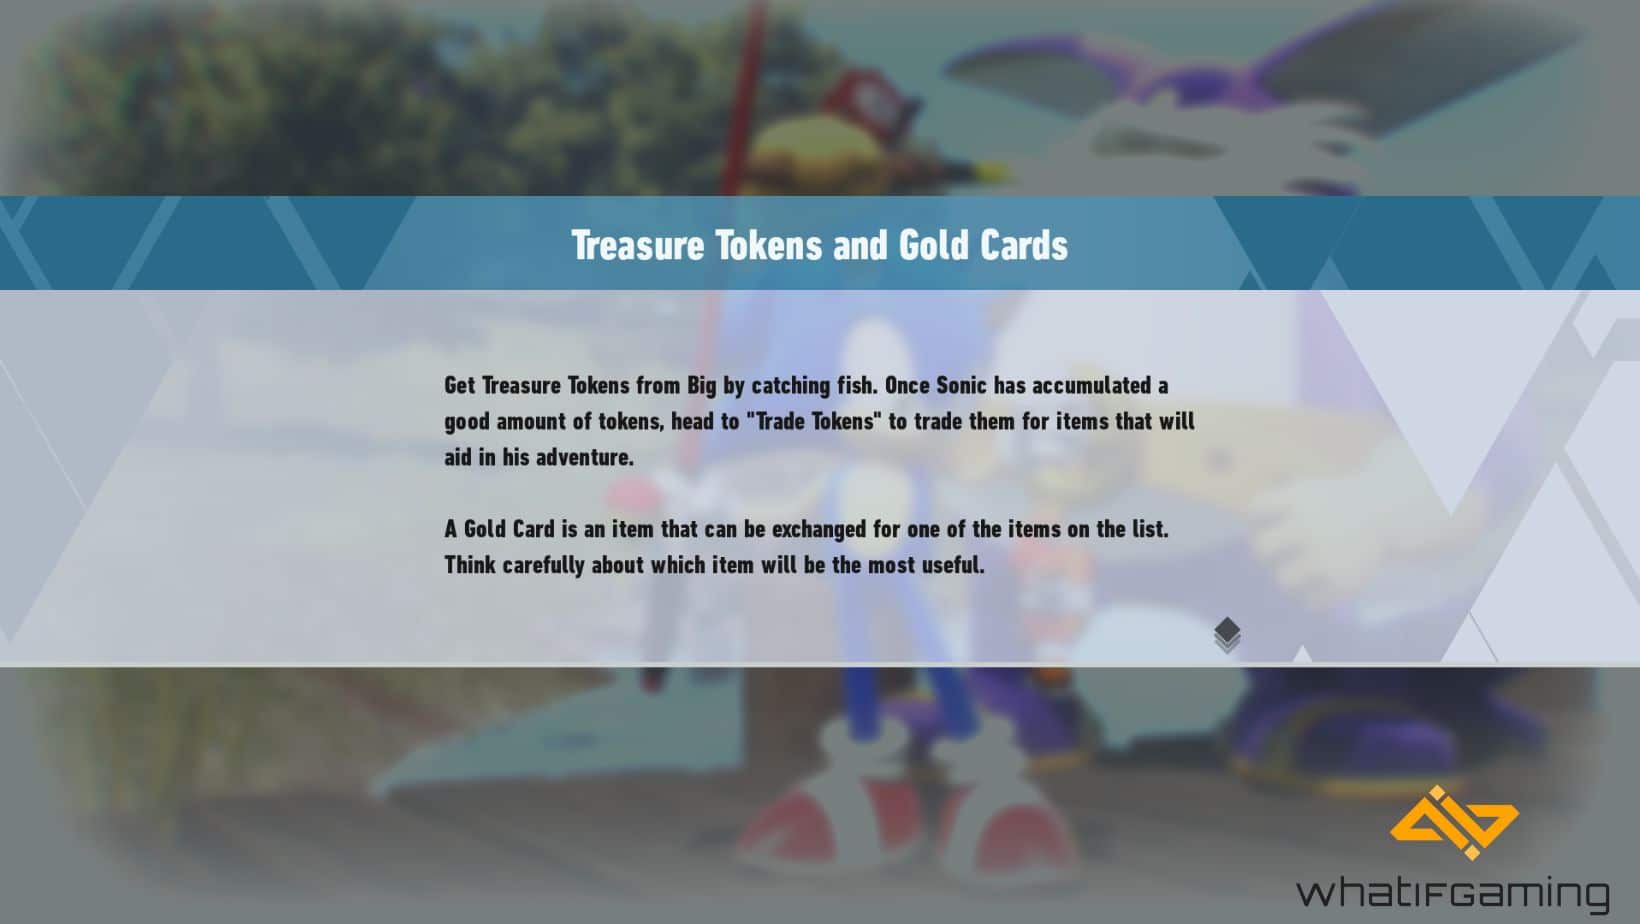 Treasure Tokens and Gold Cards